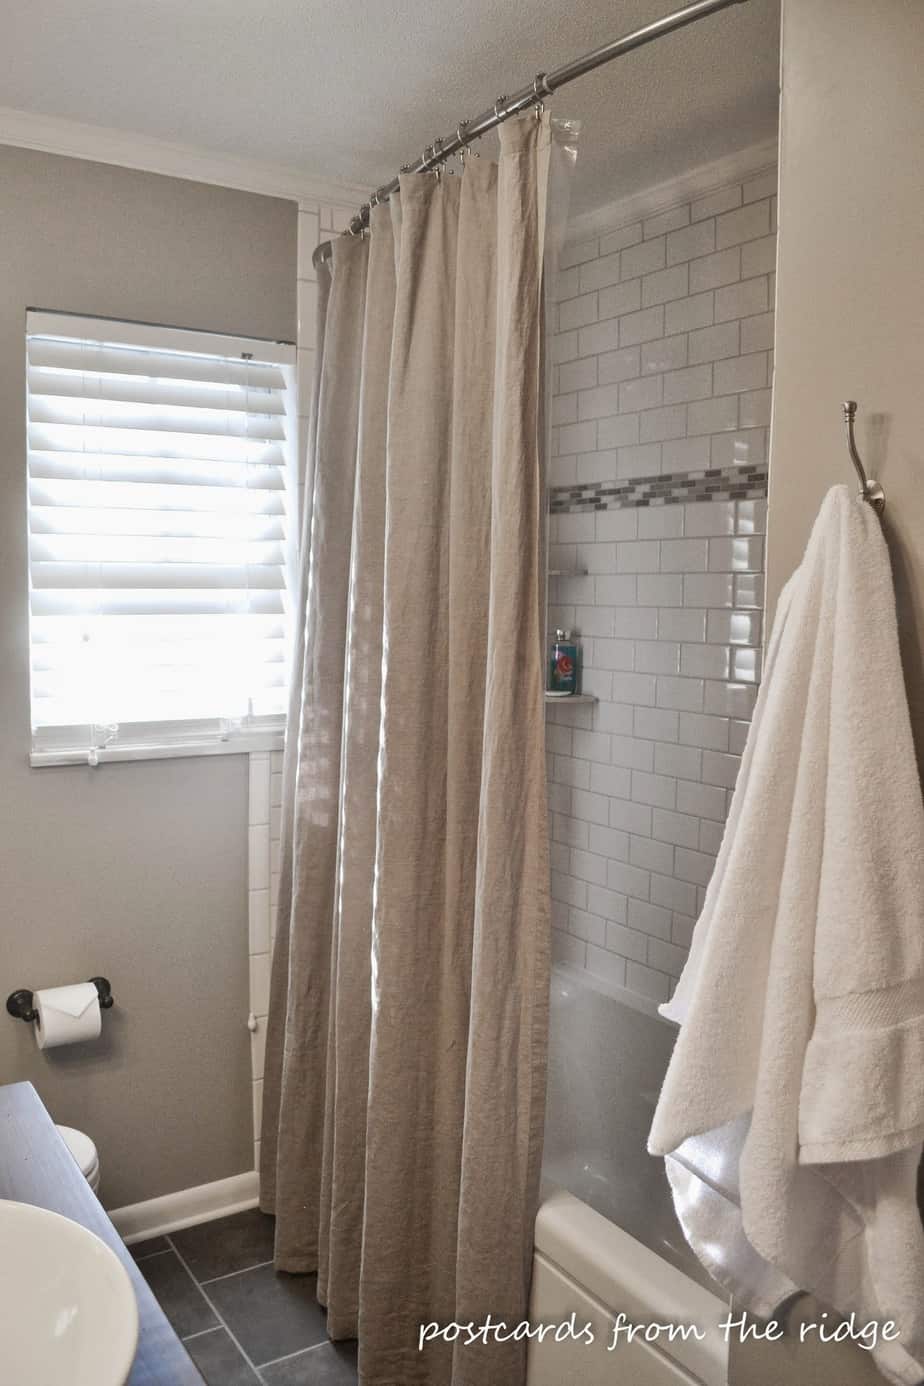 I love the extra long shower curtain and the curved shower curtain rod.  Lots of great ideas for the bathroom here.